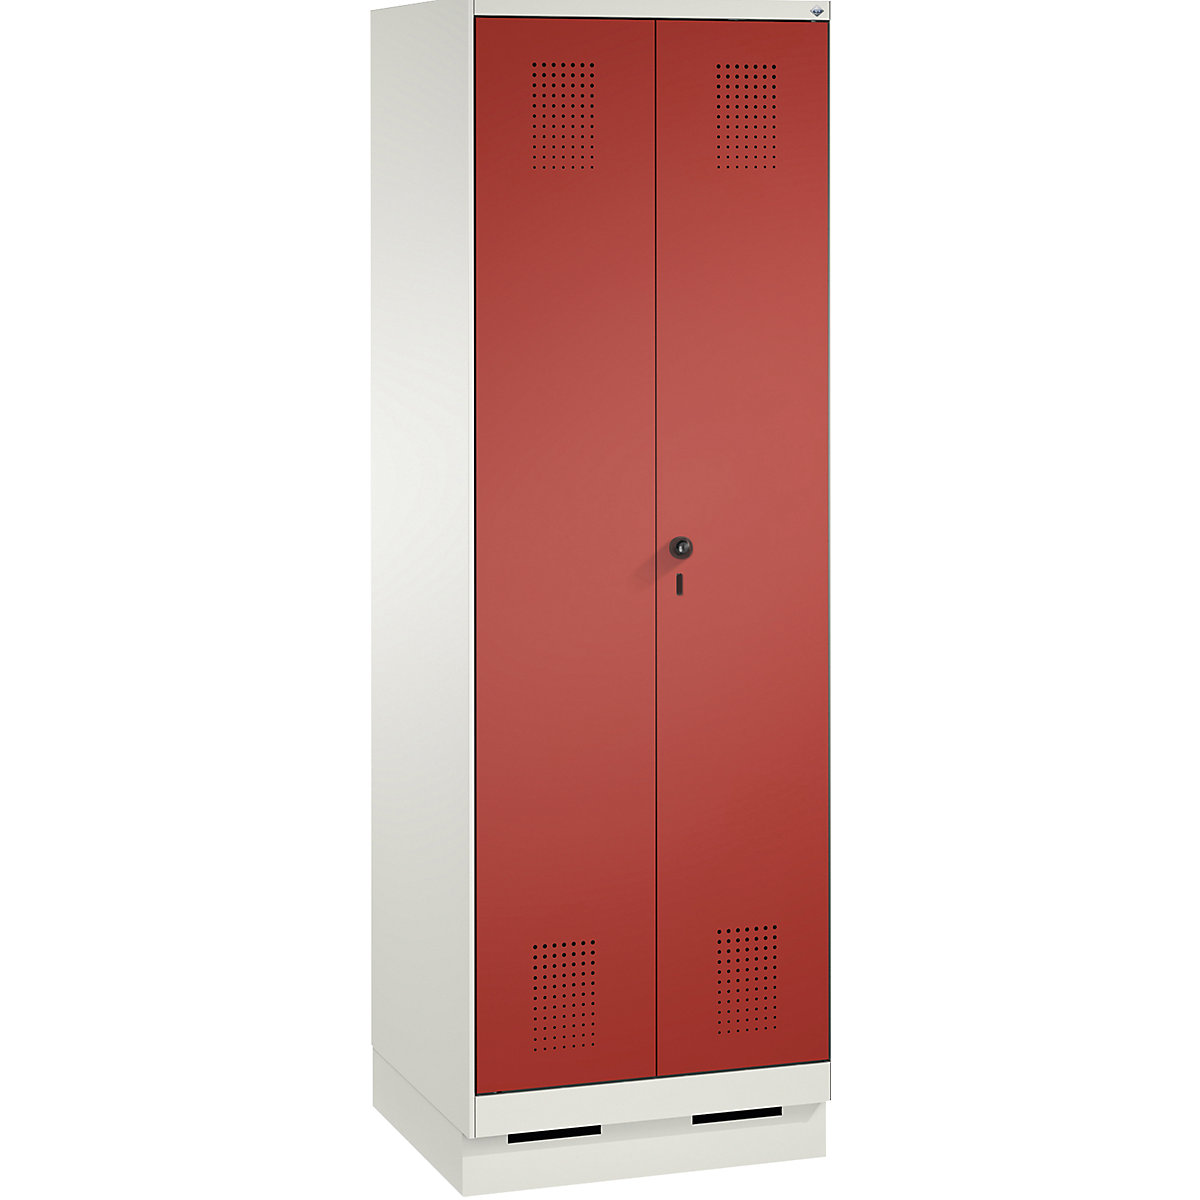 EVOLO laundry cupboard / cloakroom locker – C+P, 4 shelves, clothes rail, compartments 2 x 300 mm, with plinth, traffic white / flame red-7